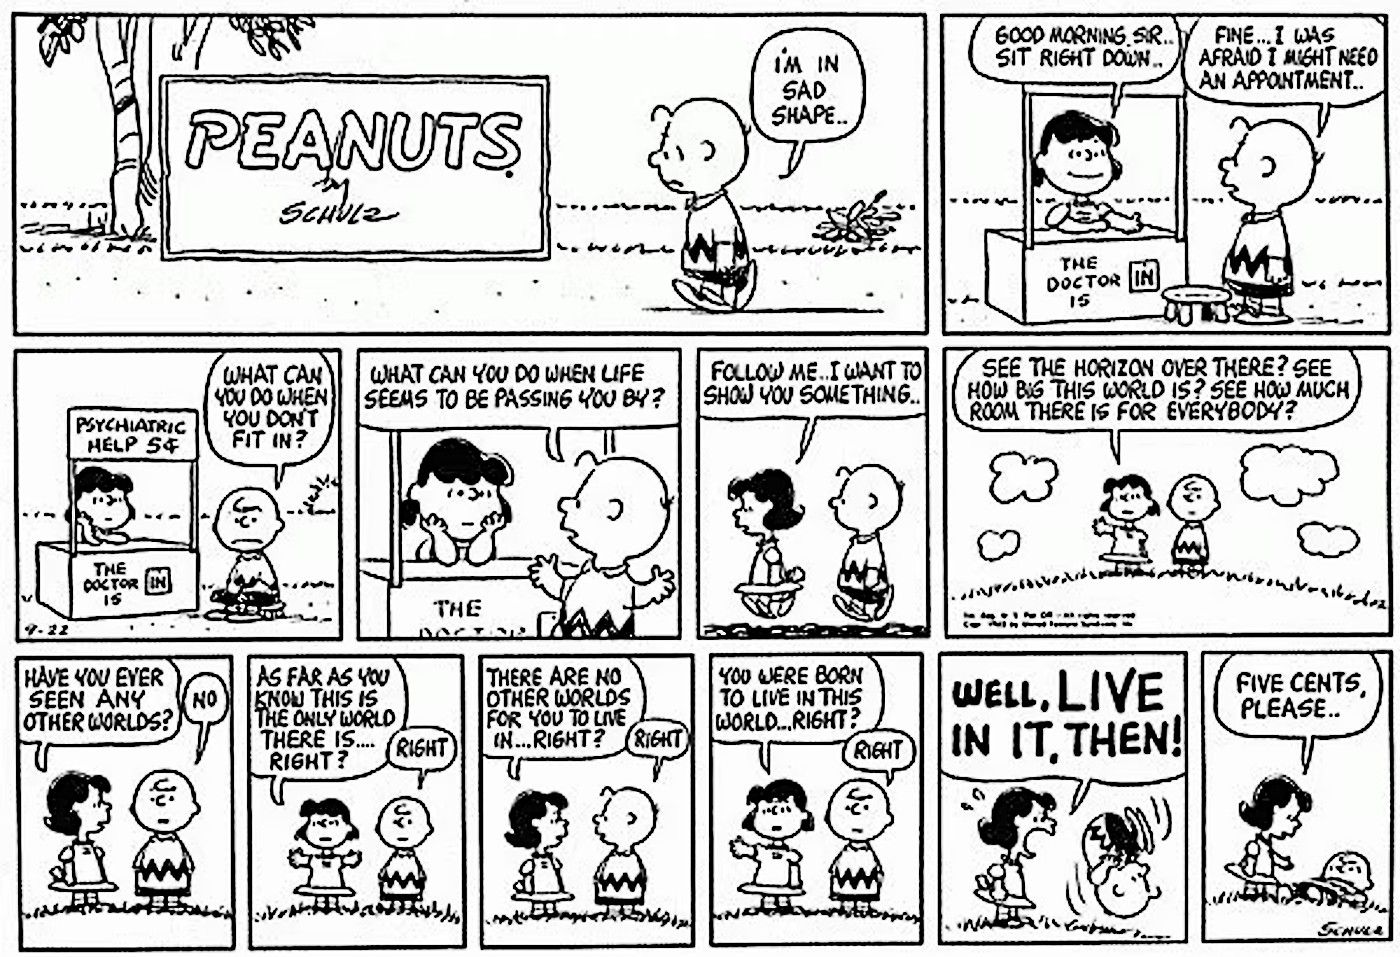 Peanuts, Charlie Brown visits Lucy's psychiatry booth...as usual, it is a less-than-productive session.